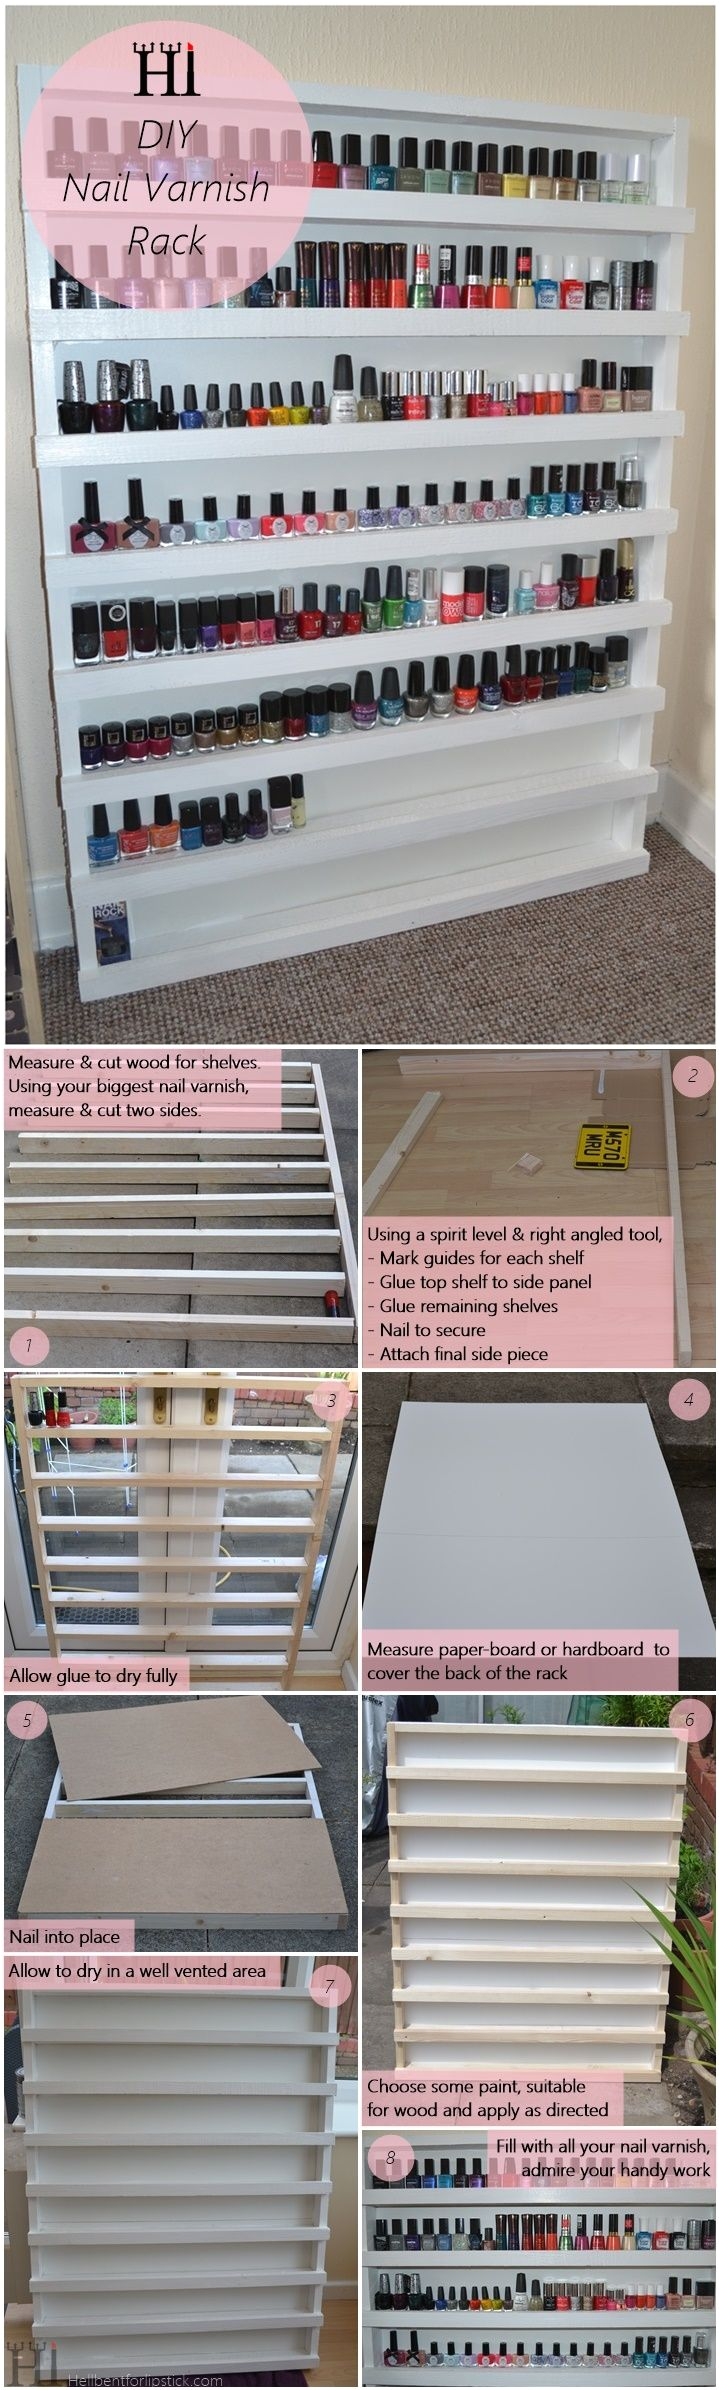 Diy Nail Polish Rack Ikea 32 Best Nails Images On Pinterest Nail Scissors Hair Style and